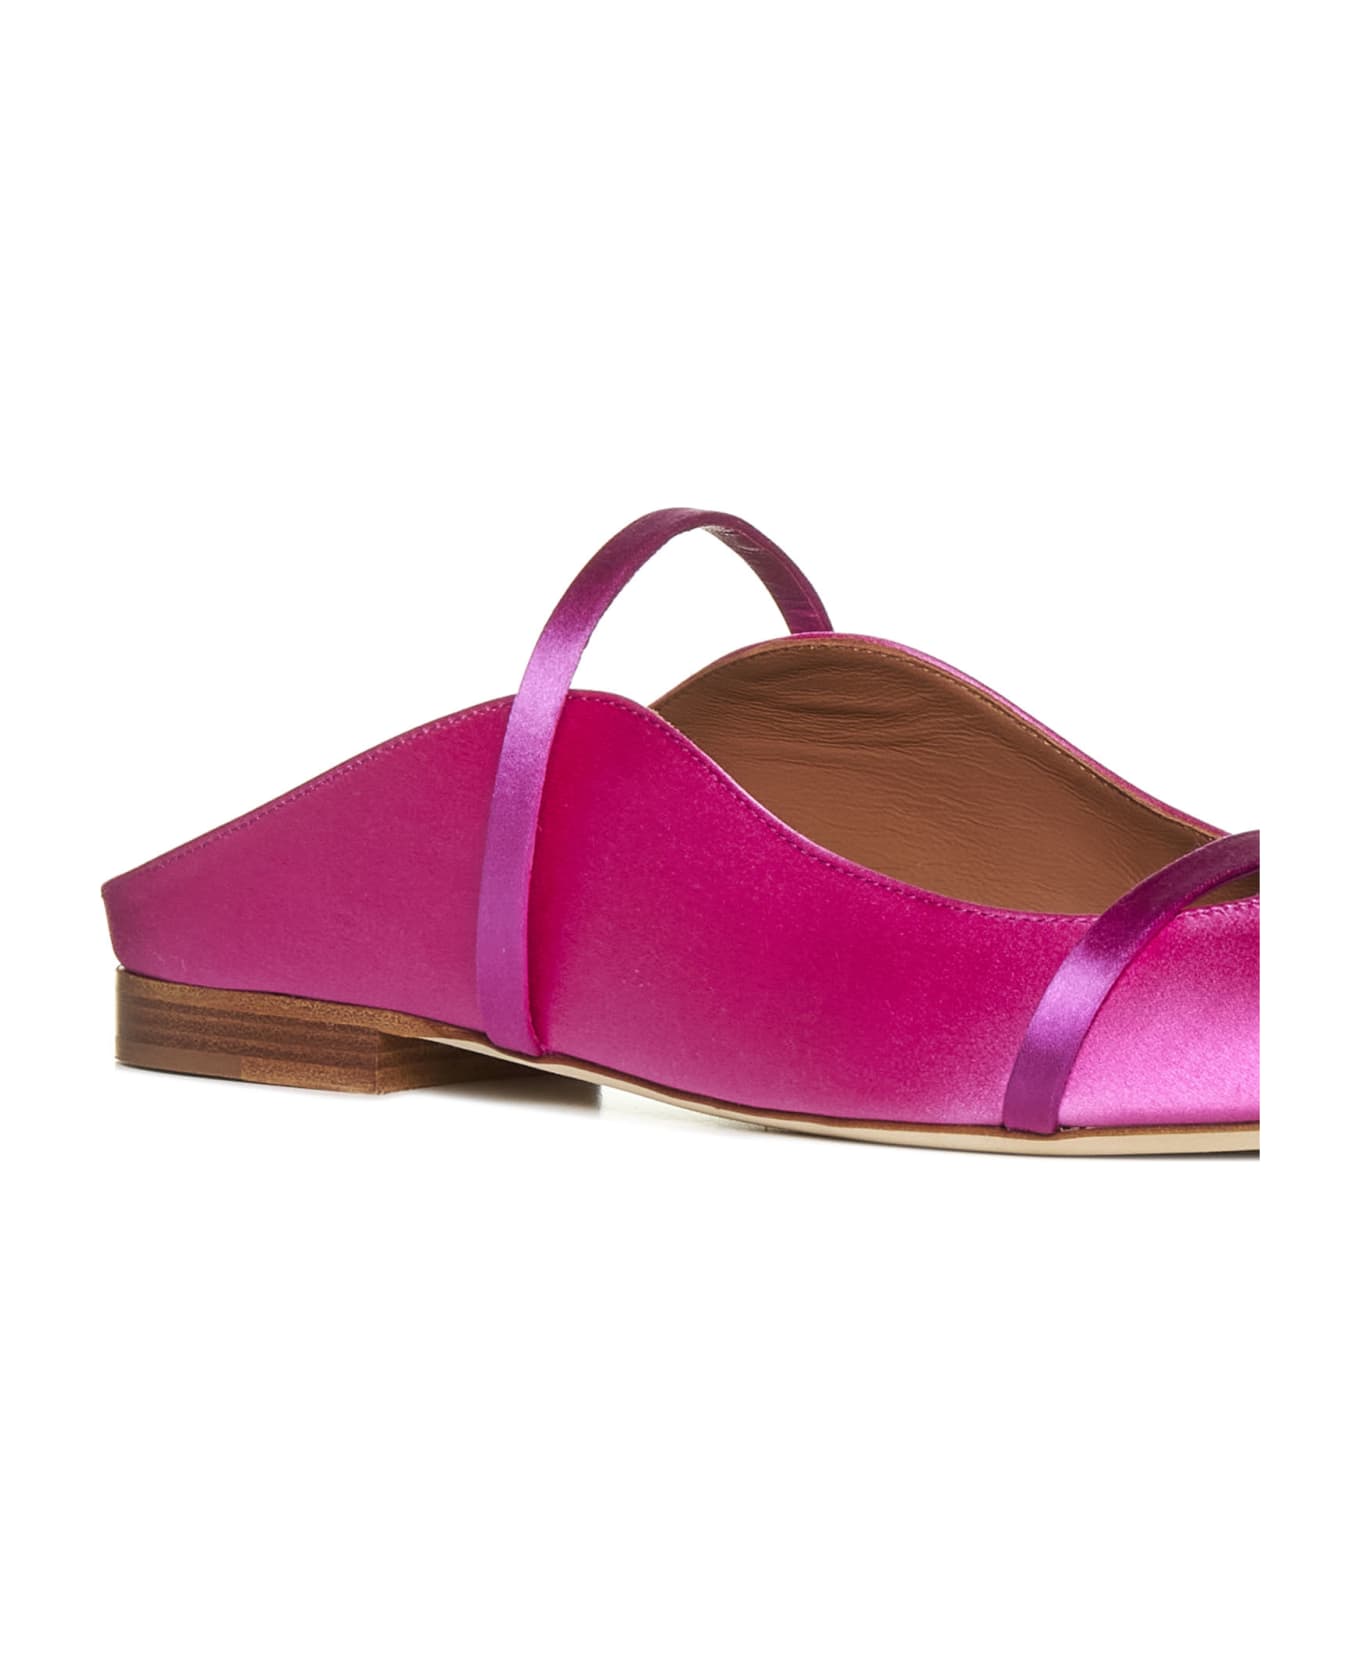 Malone Souliers Flat Shoes - Pink berry